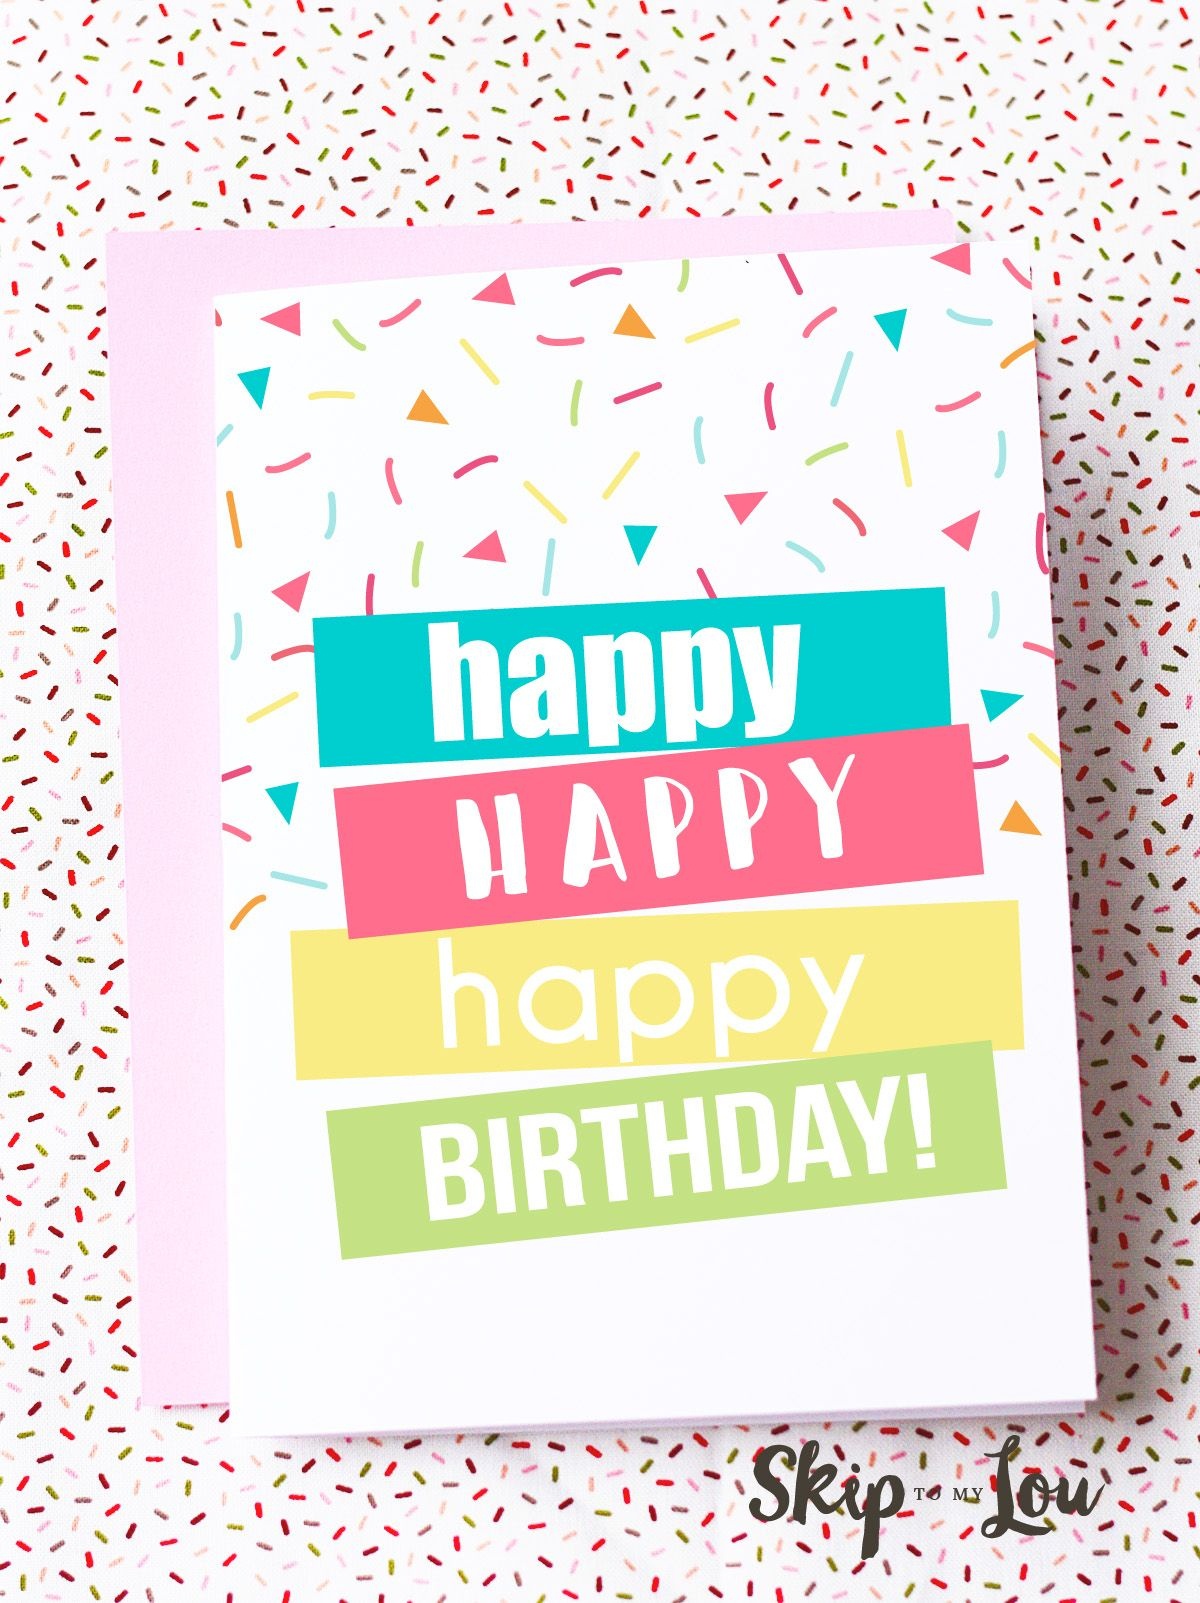 how-to-make-birthday-cards-at-home-homemade-birthday-cards-for-kids-to-create-the-art-of-images